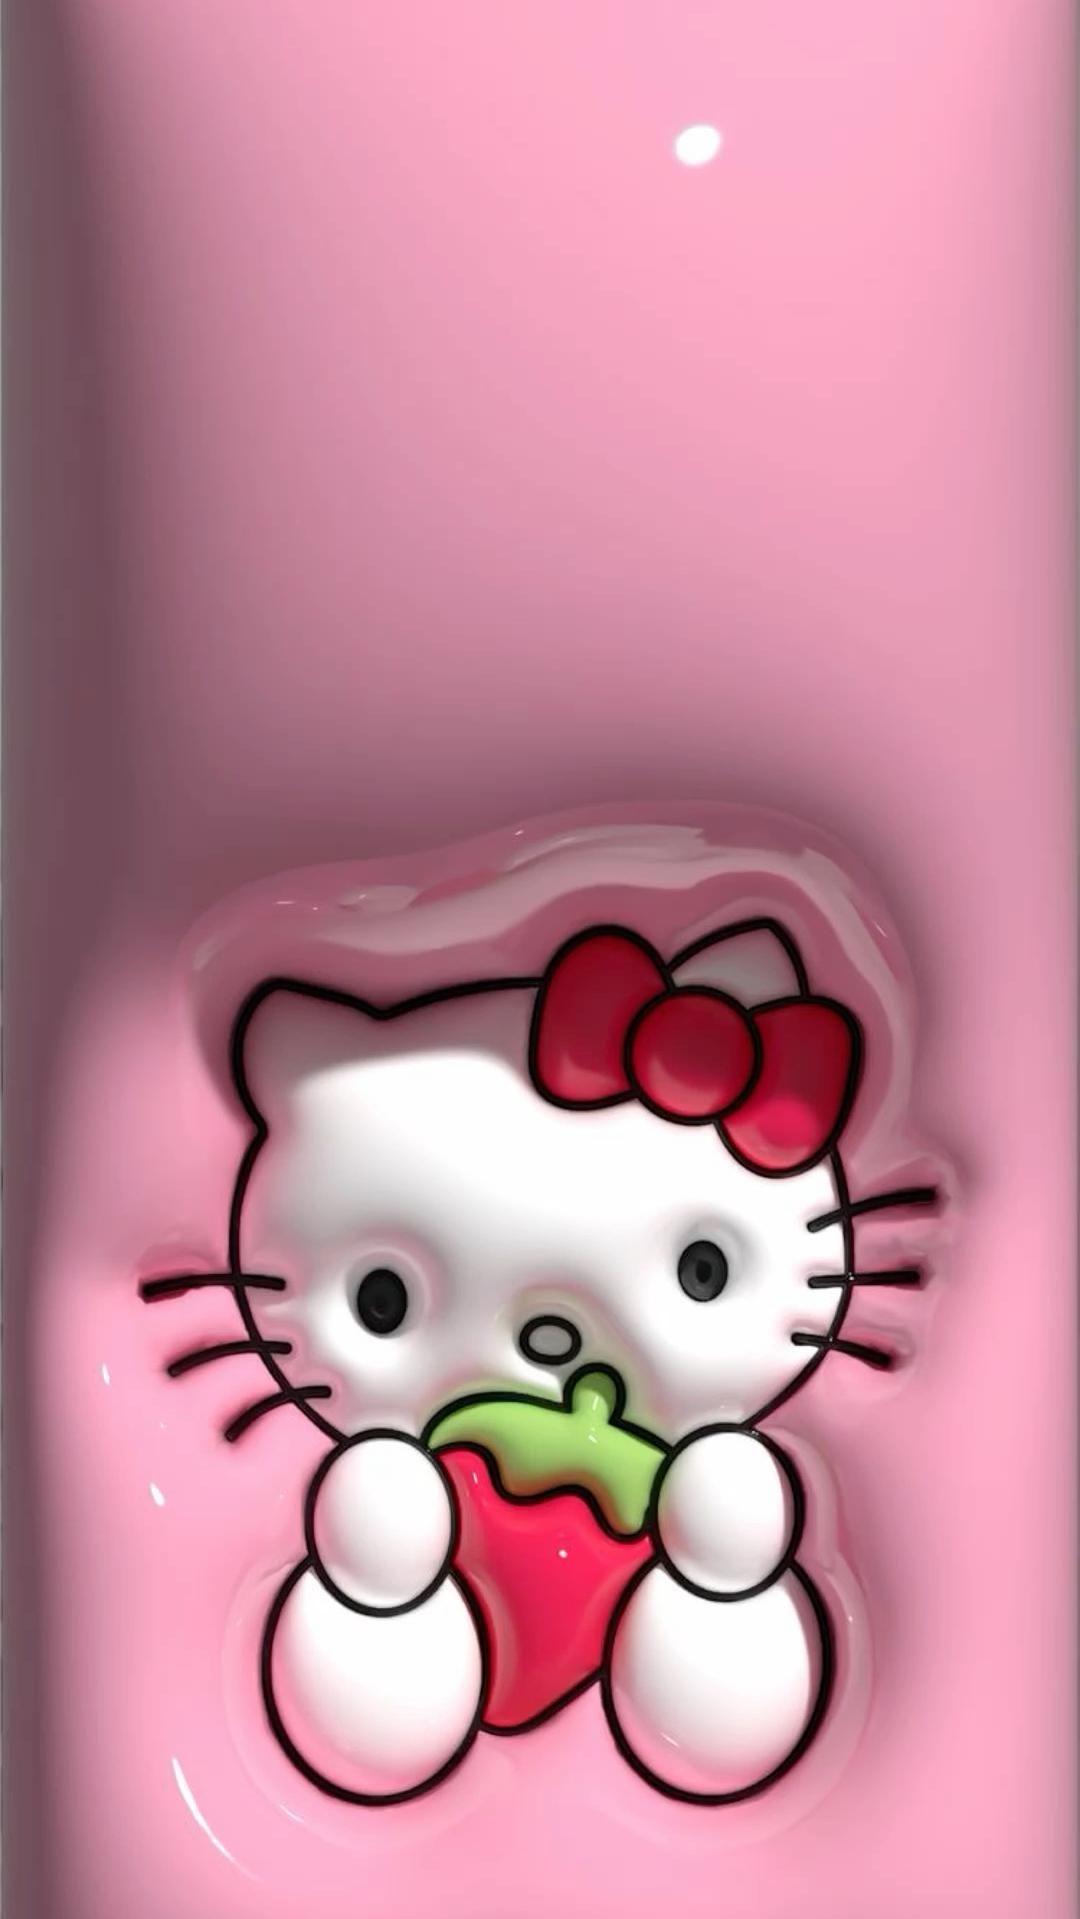 3d Hello Kitty Wallpaper For iPhone In